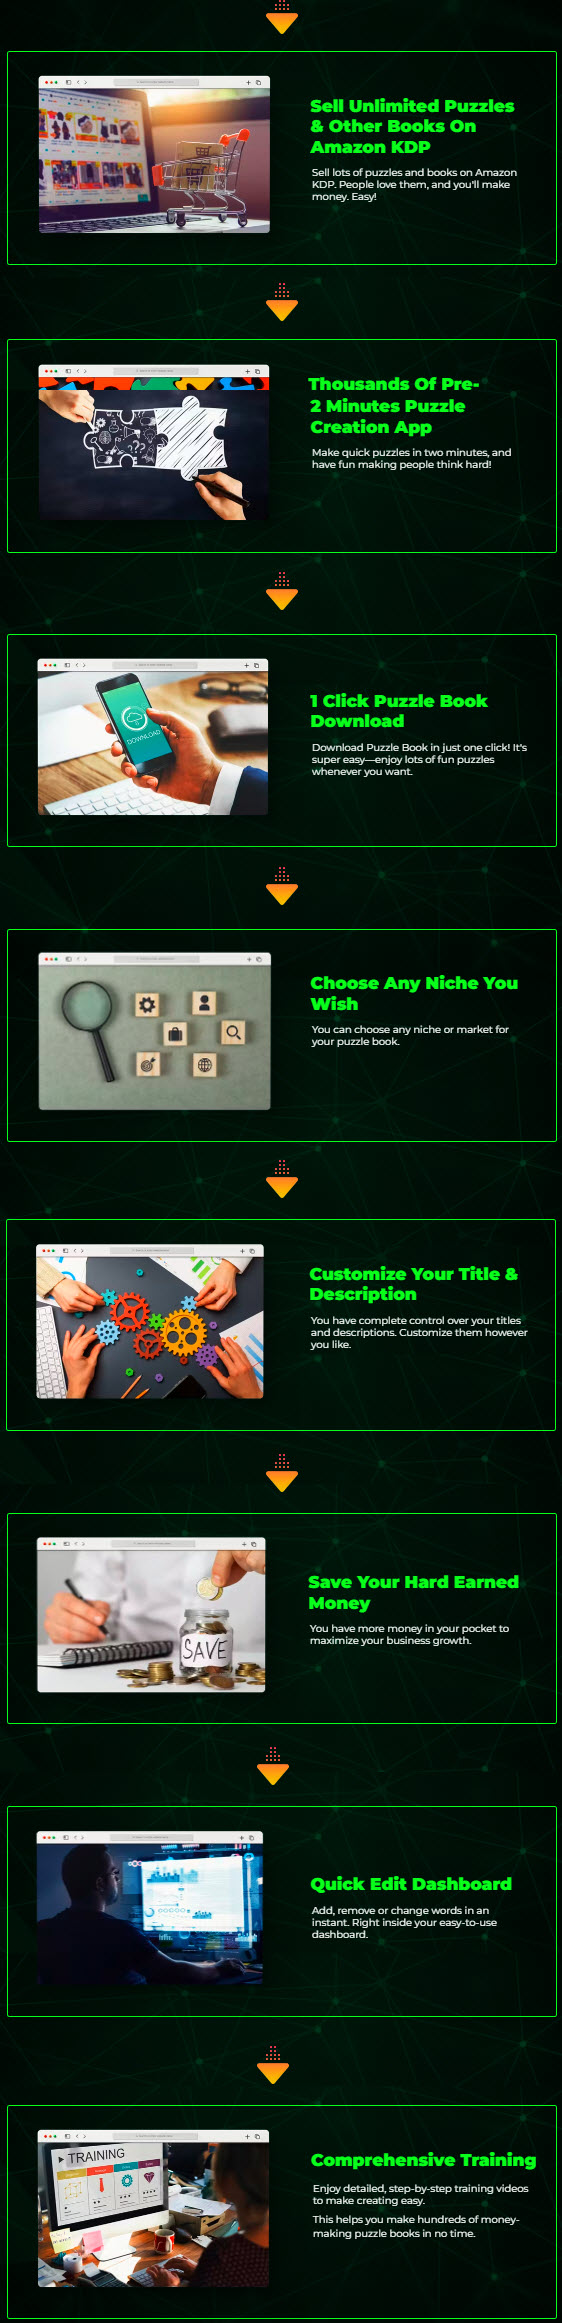 AI PuzzleMaker Review Features (1)